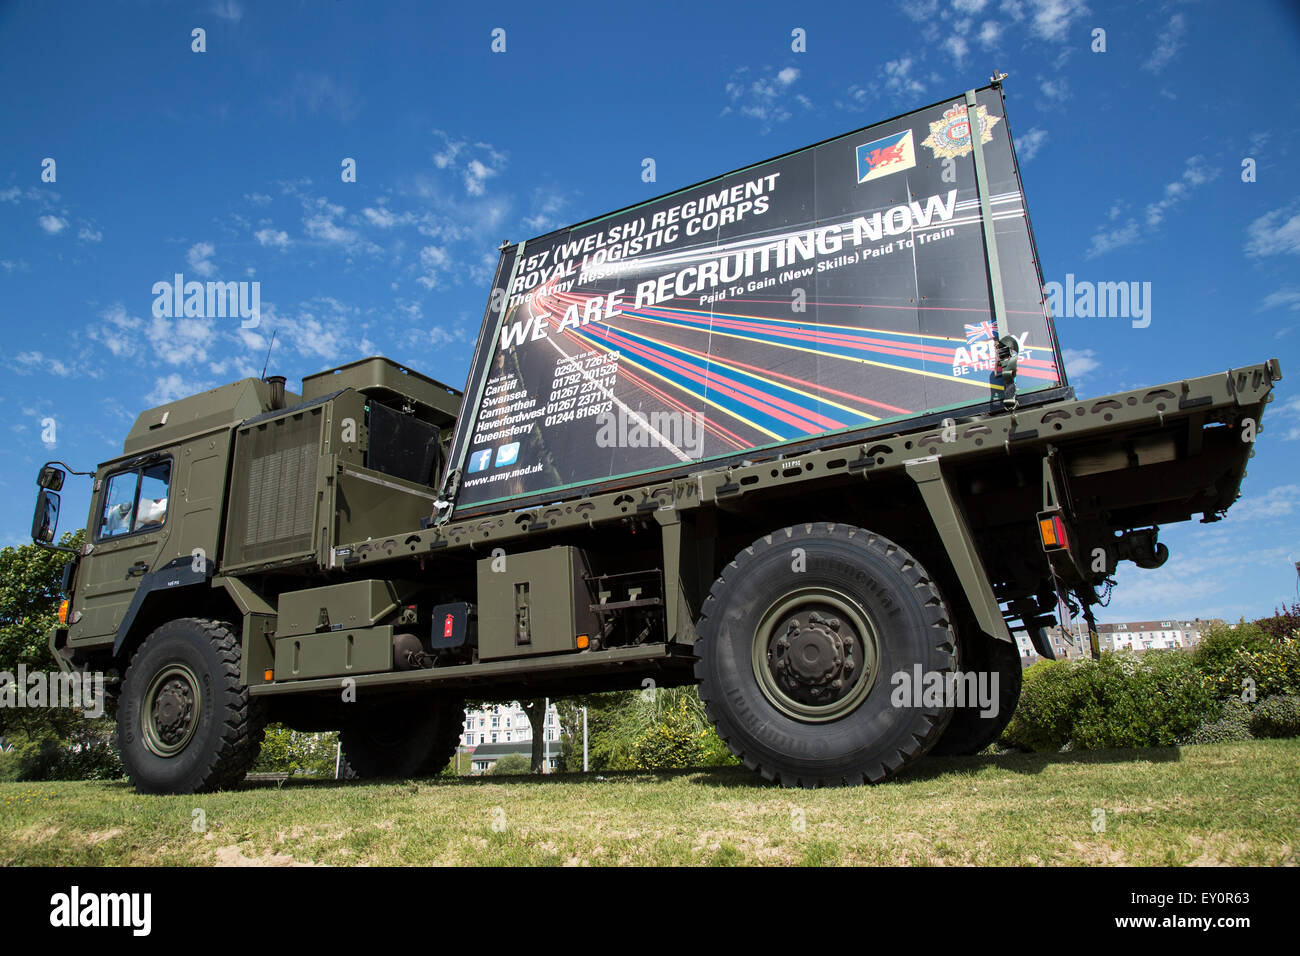 Army recruitment poster on military vehicle, Swansea, West Glamorgan, South Wales, UK Stock Photo